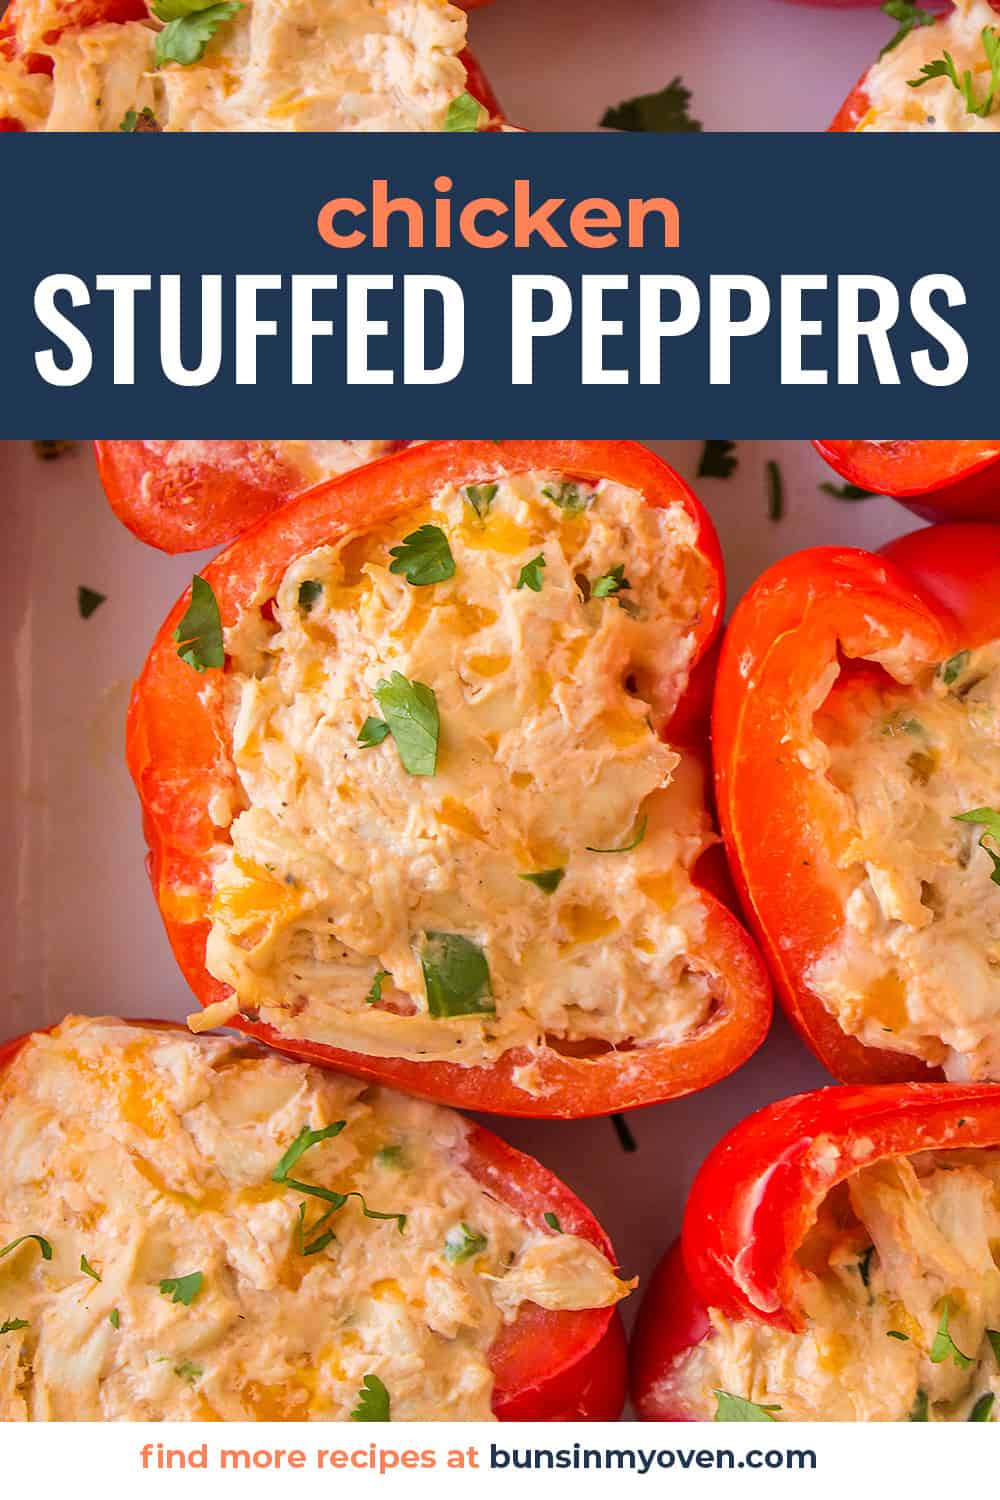 Chicken stuffed peppers in baking dish.